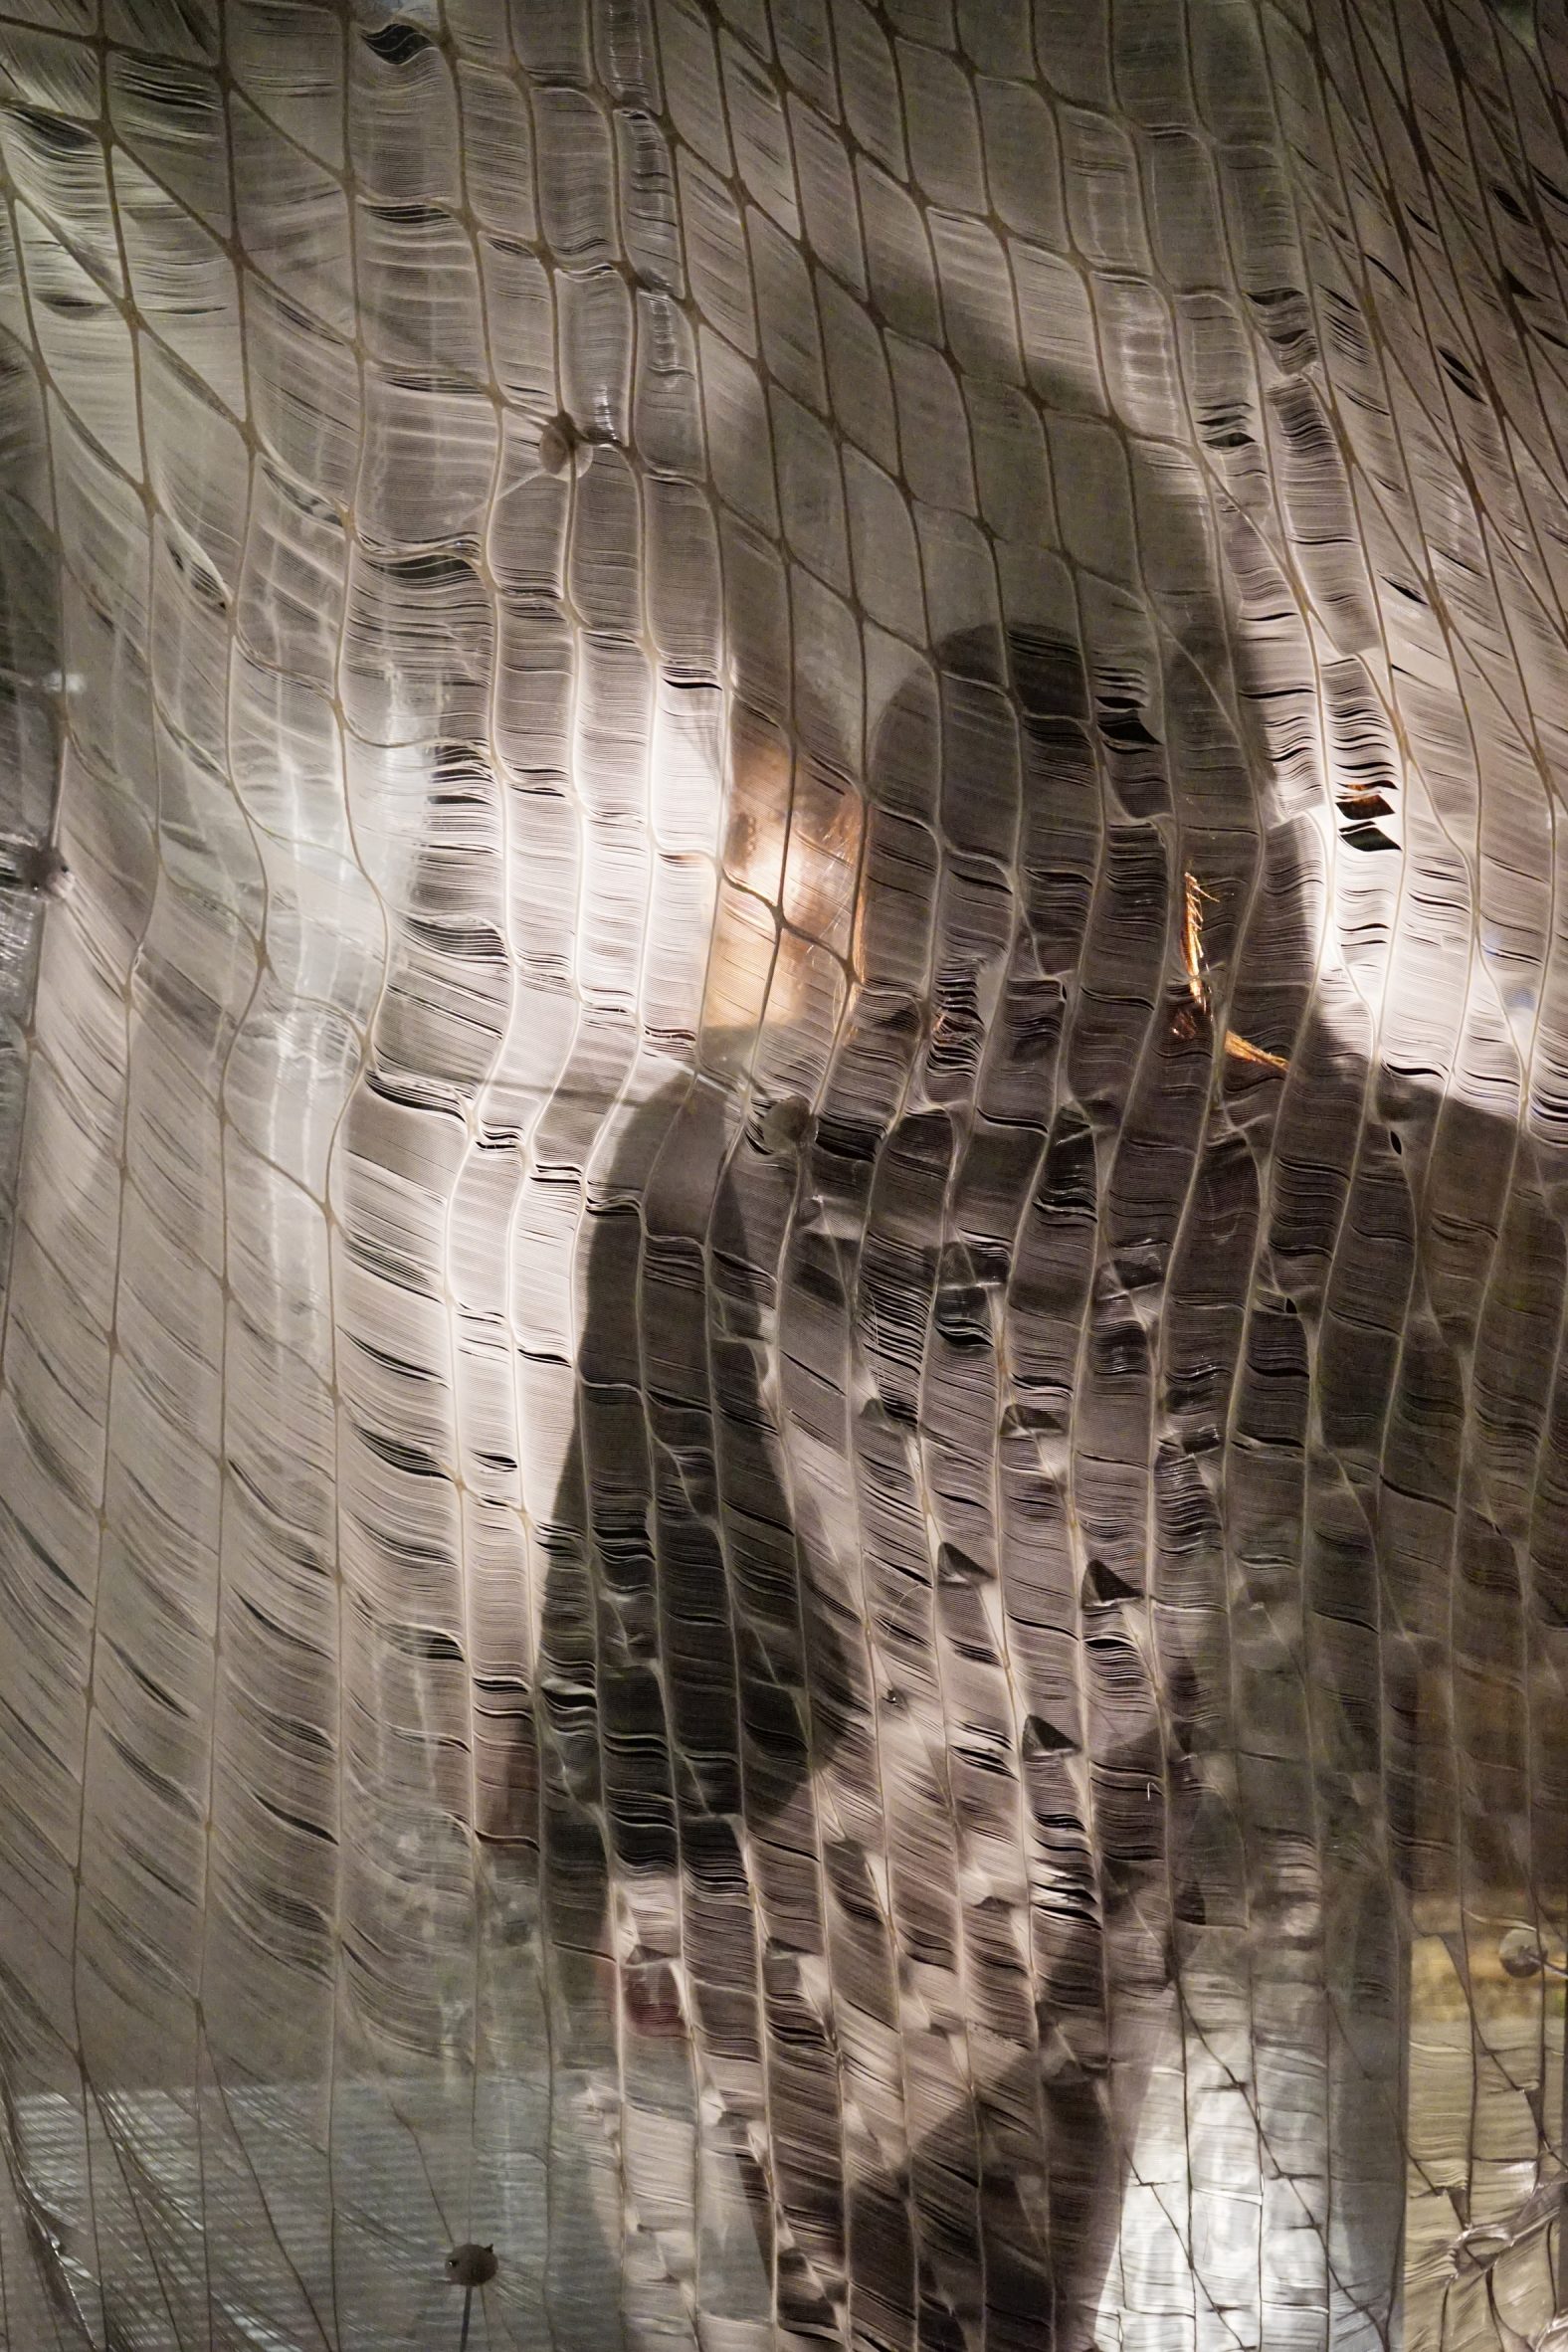 Photograph of a figure behind a translucent piece of fabric